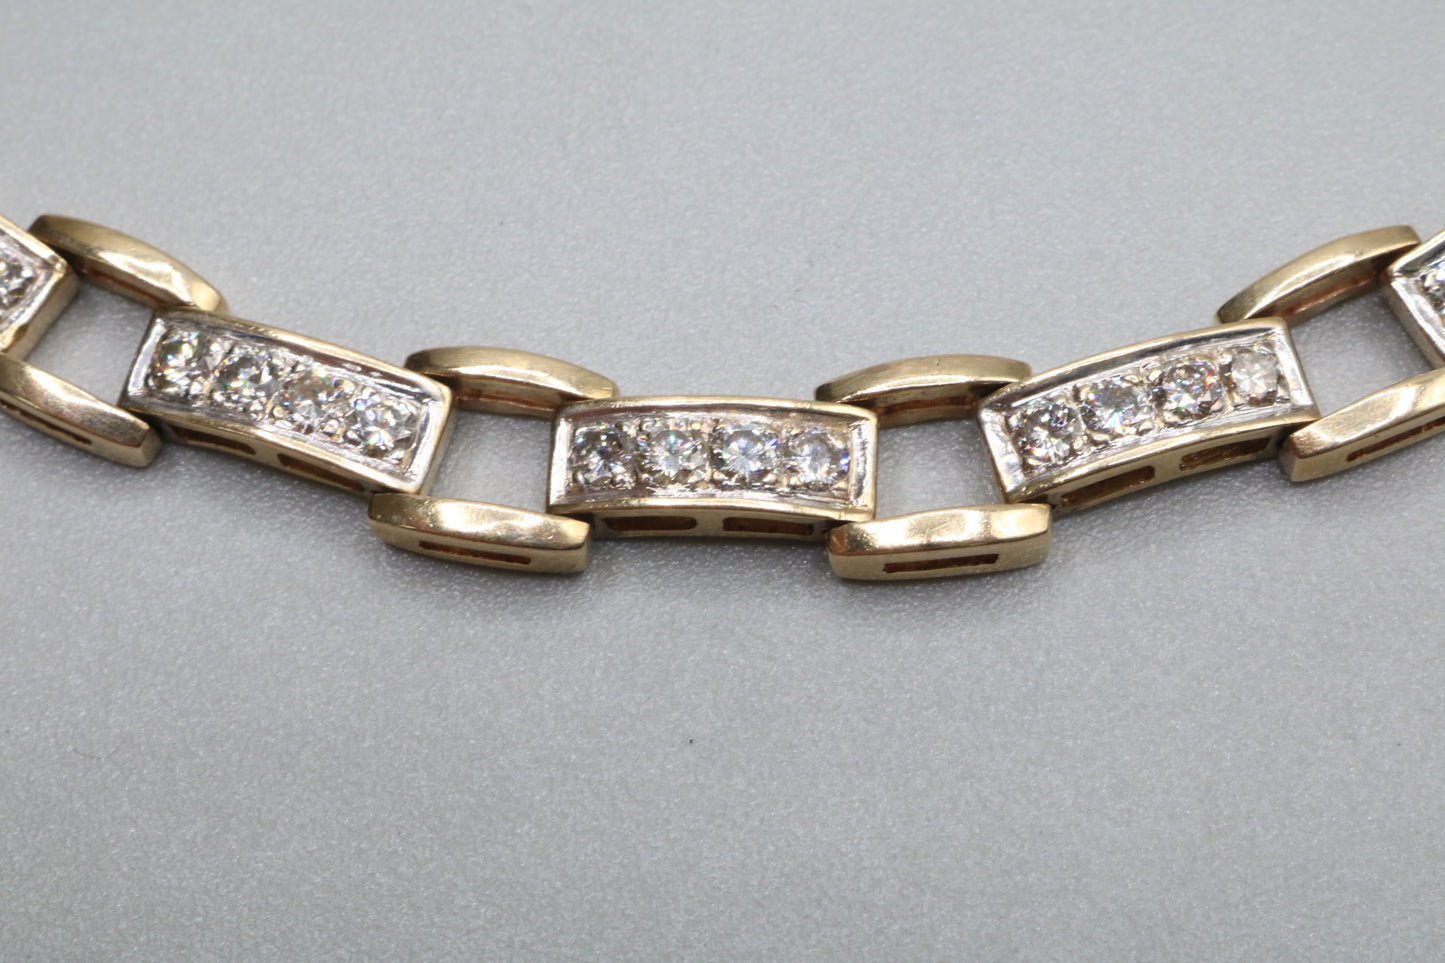 14K Yellow Gold Fancy Diamond Bracelet (4.00 CTW) (7 3/4 Inches) (Local Pick-Up Only)